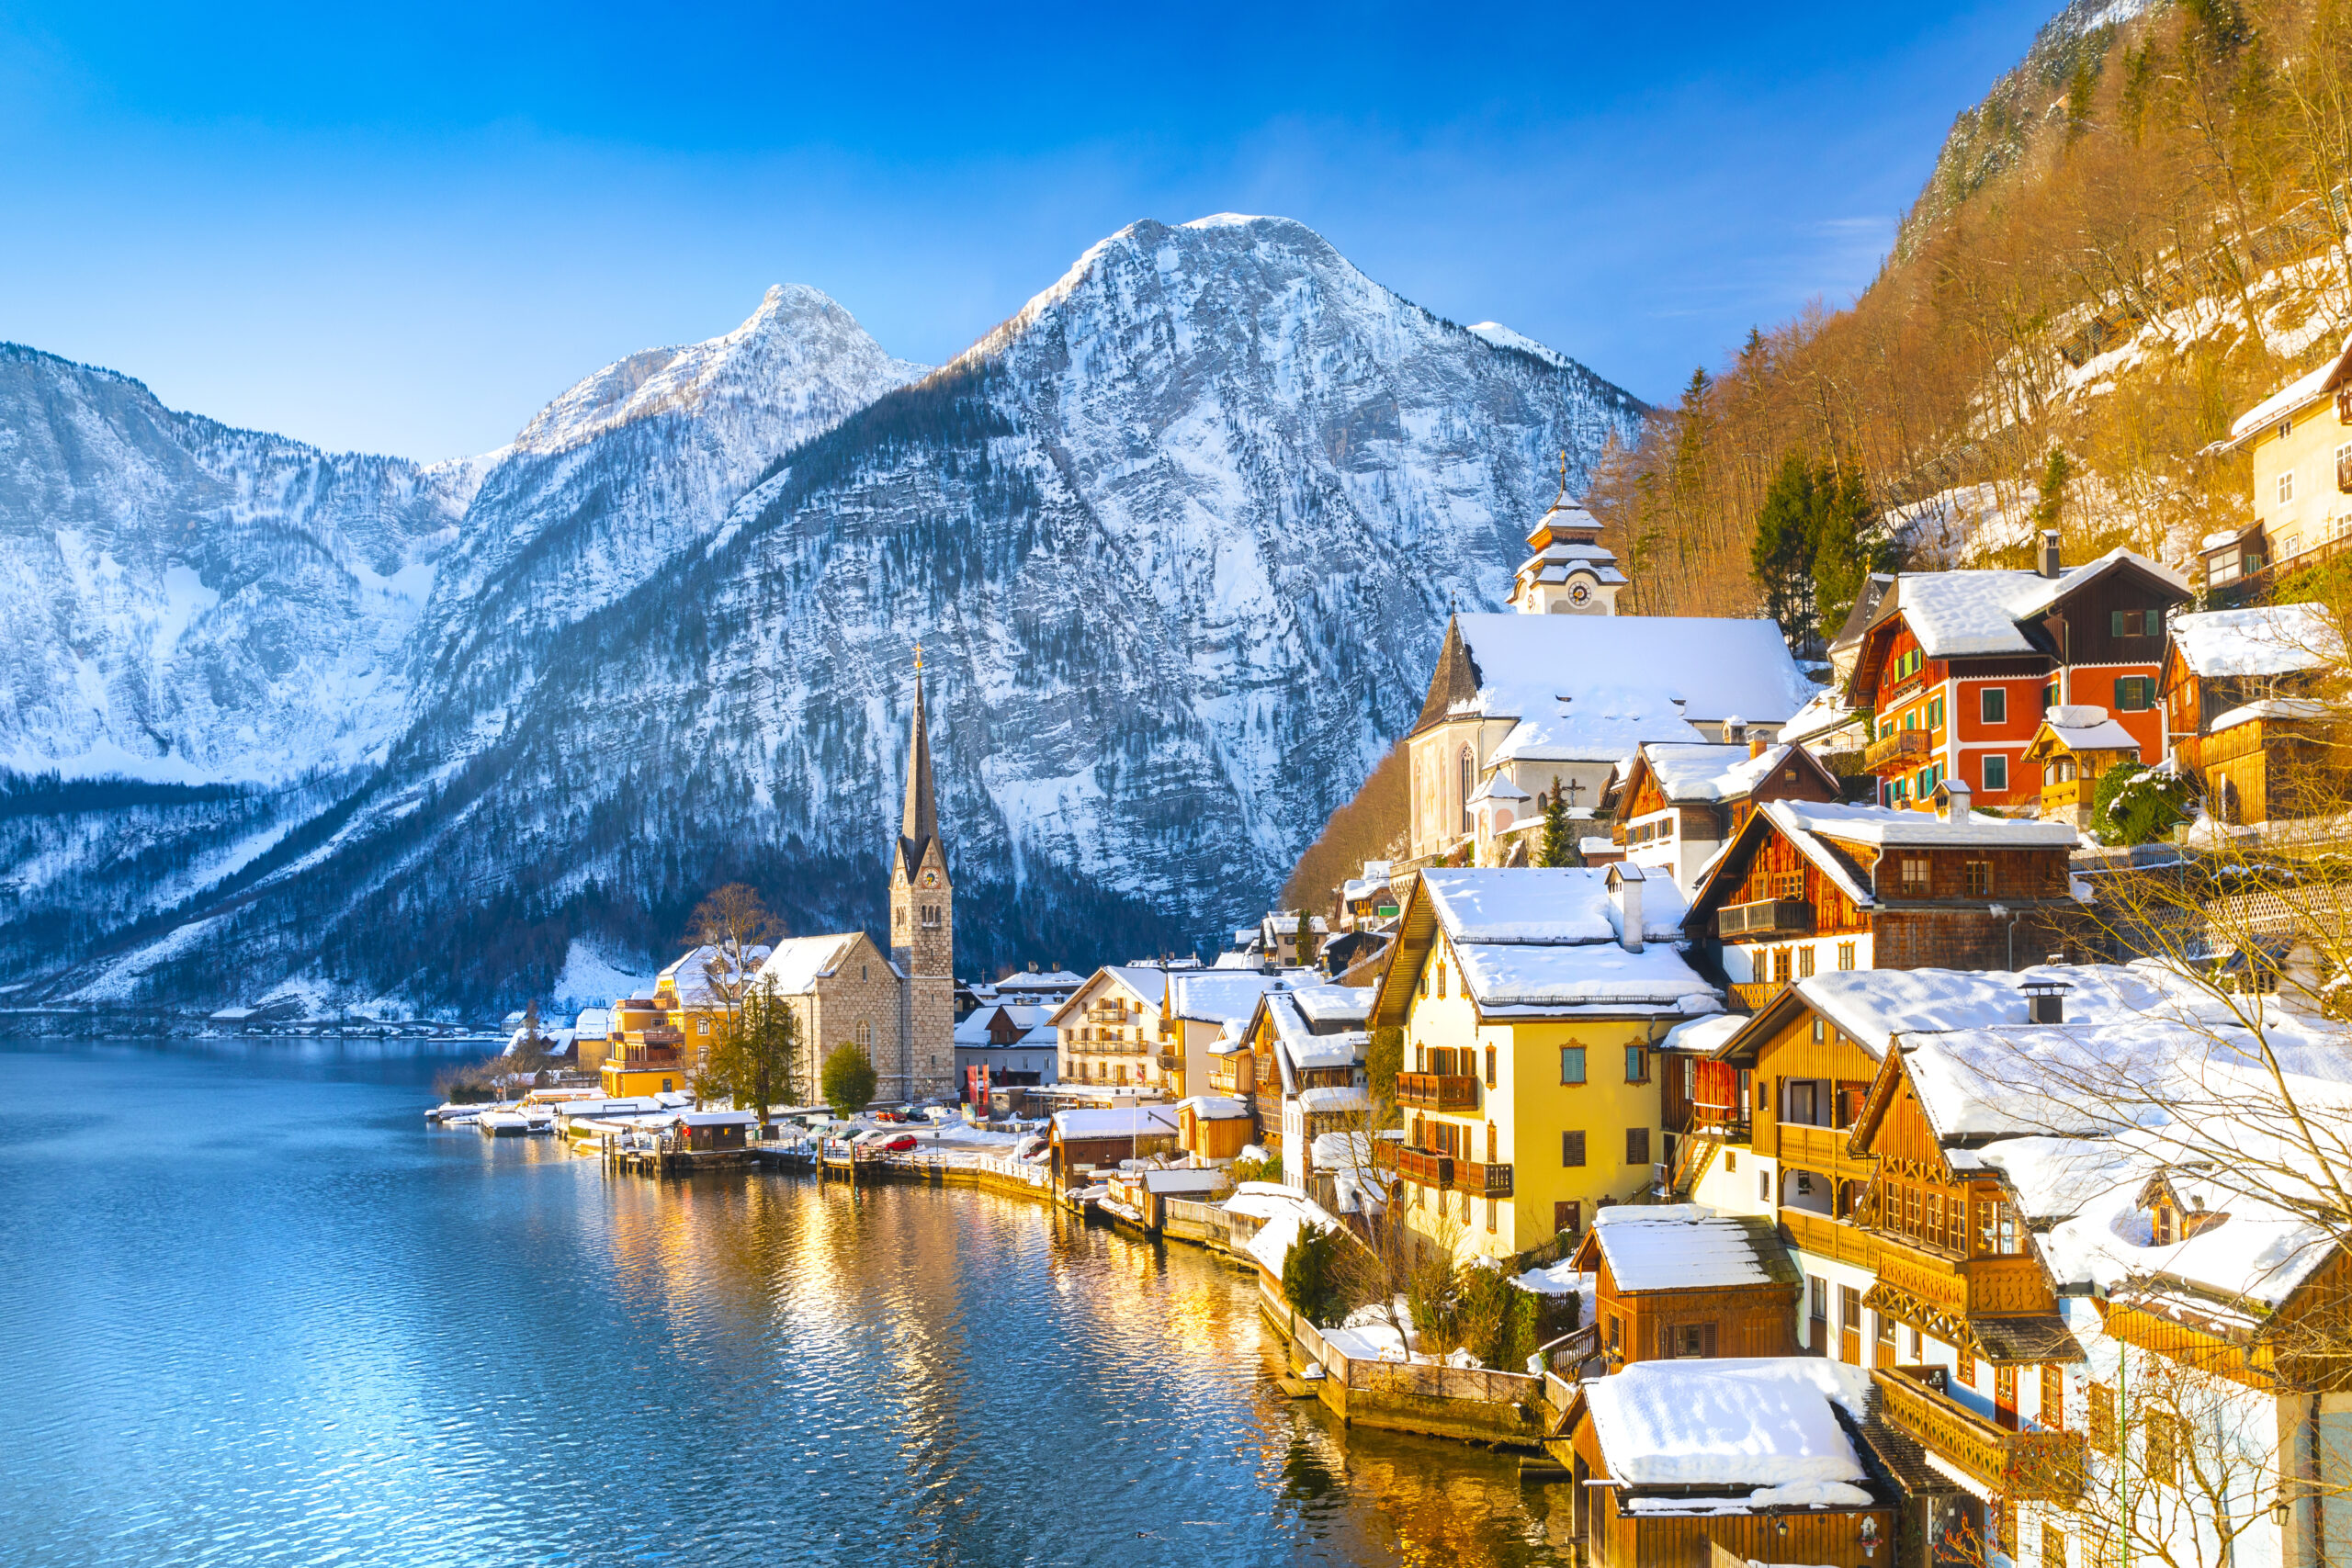 Hallstatt in Winter - Why it's the Most Magical Time to Visit!